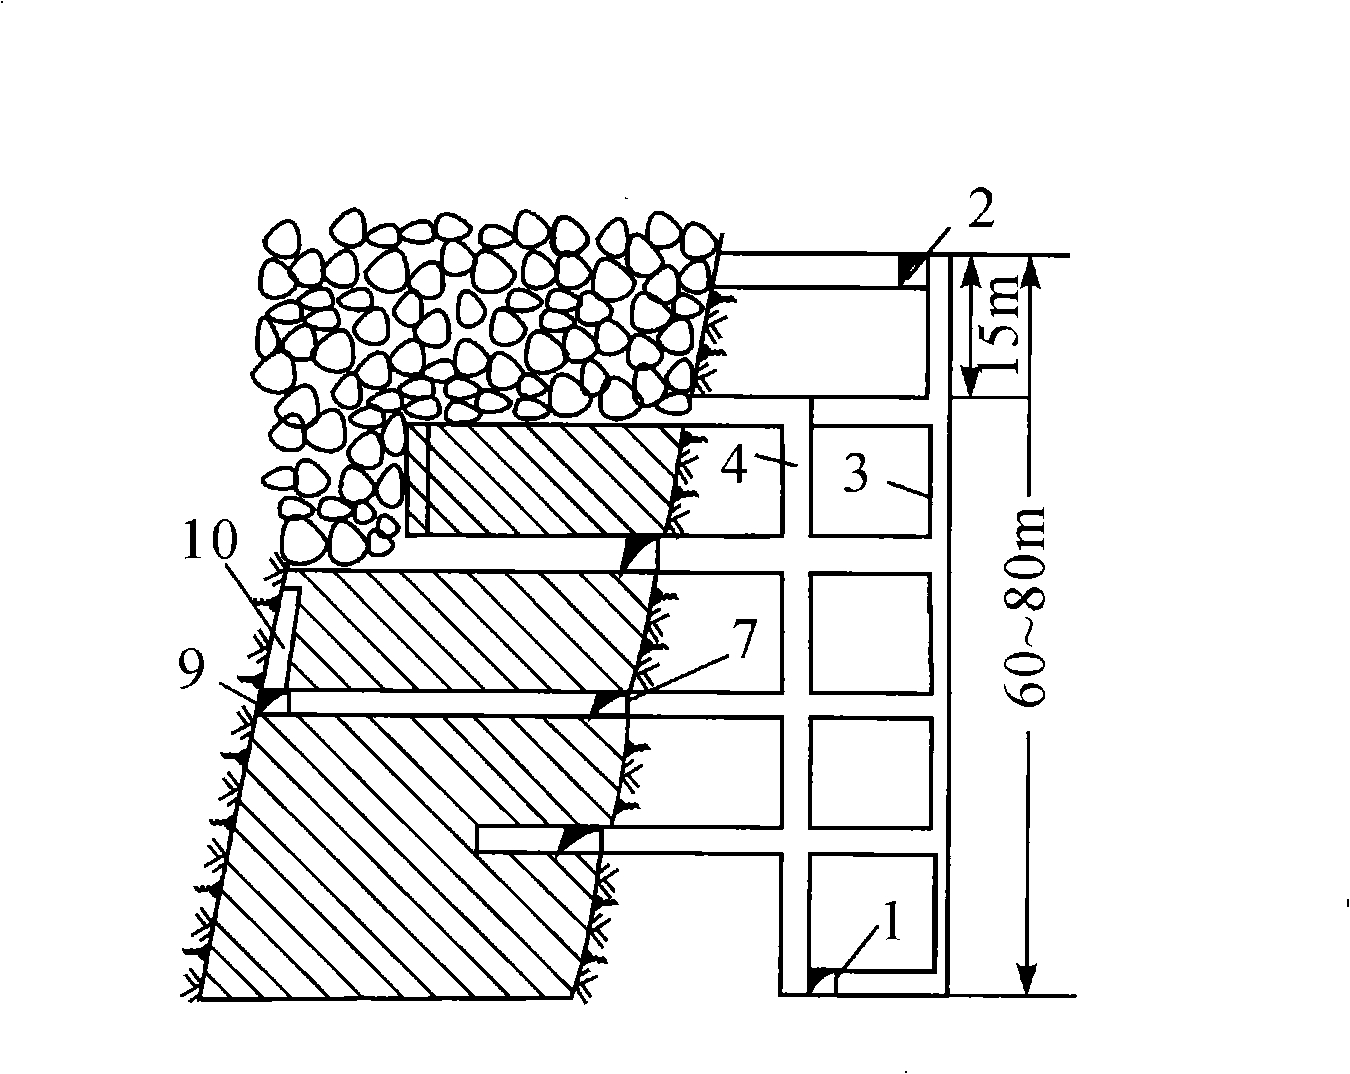 Non-pillar sublevel caving mining method for direct loading for ore